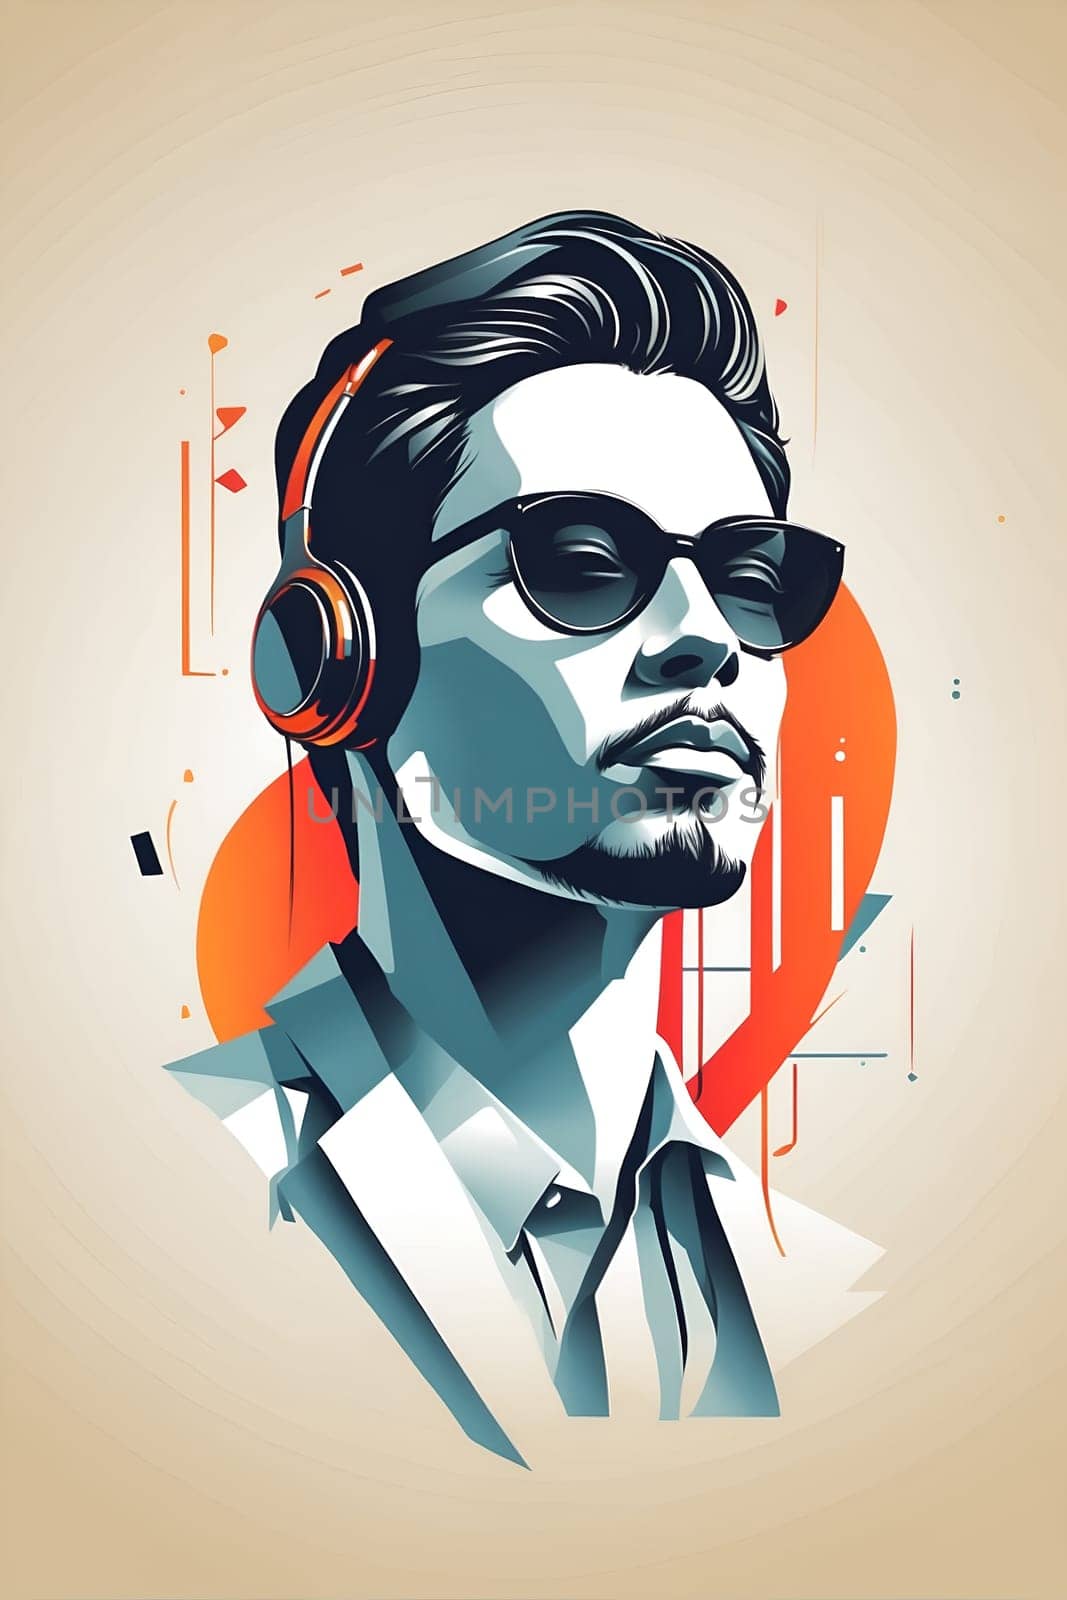 A cool and trendy photo of a man wearing headphones and sunglasses, embodying the fashion-forward look of a contemporary music enthusiast.